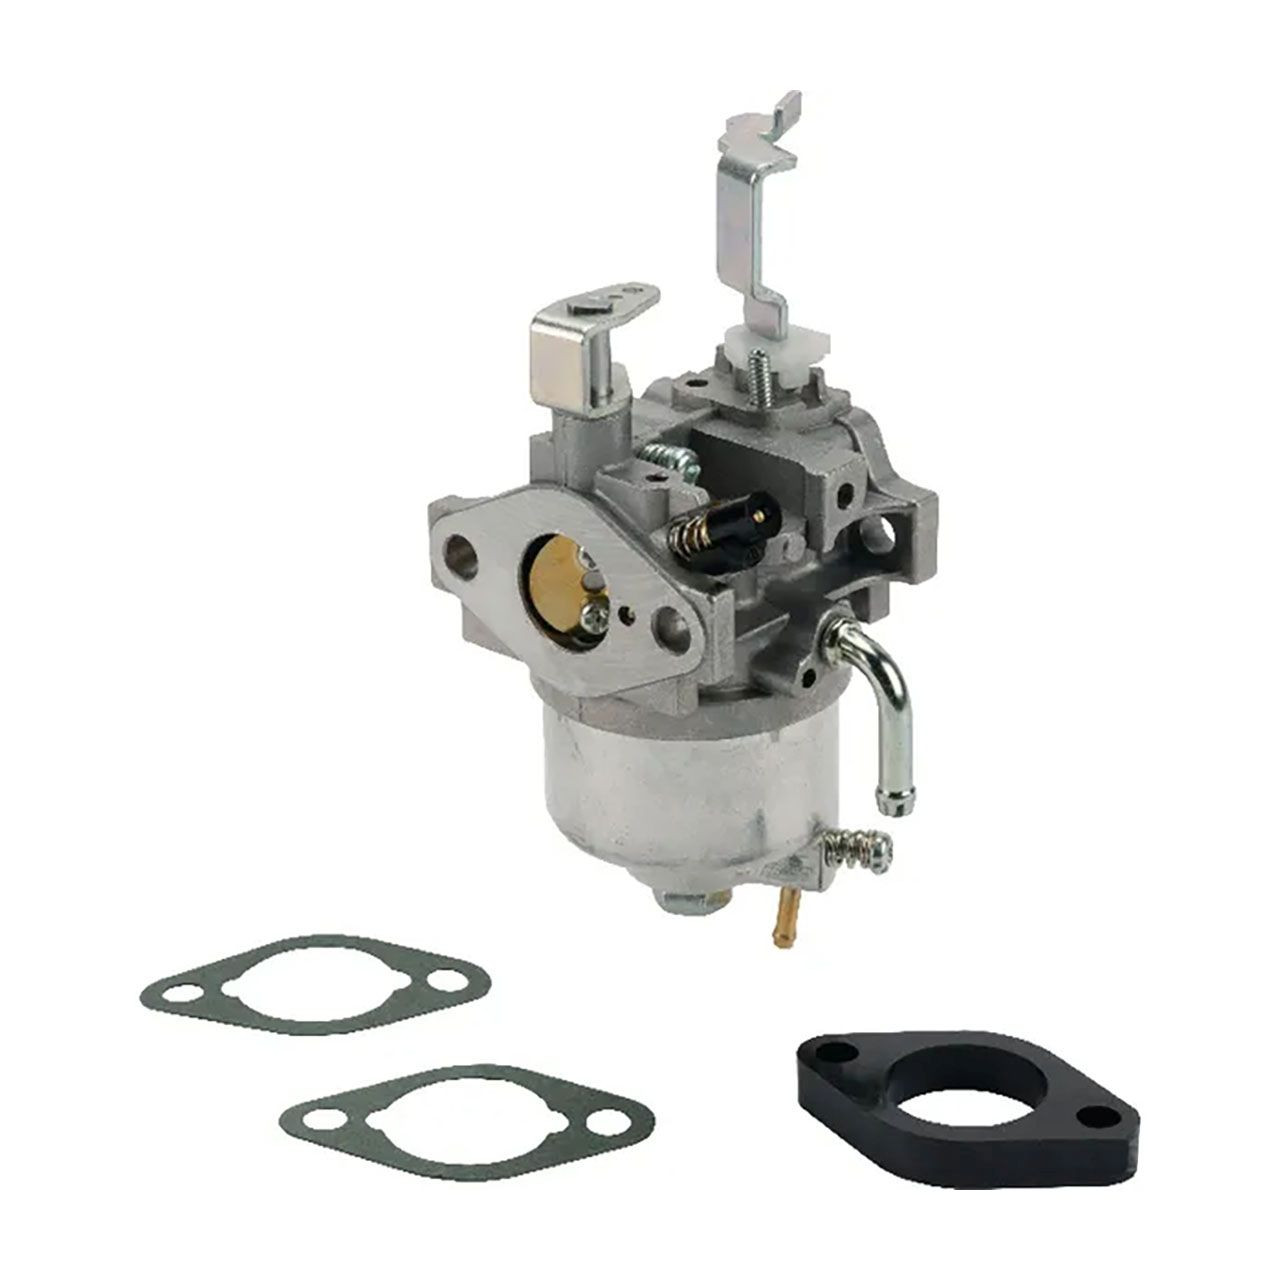 BUY Briggs & Stratton Complete Carb Carburettor Assembly 795475